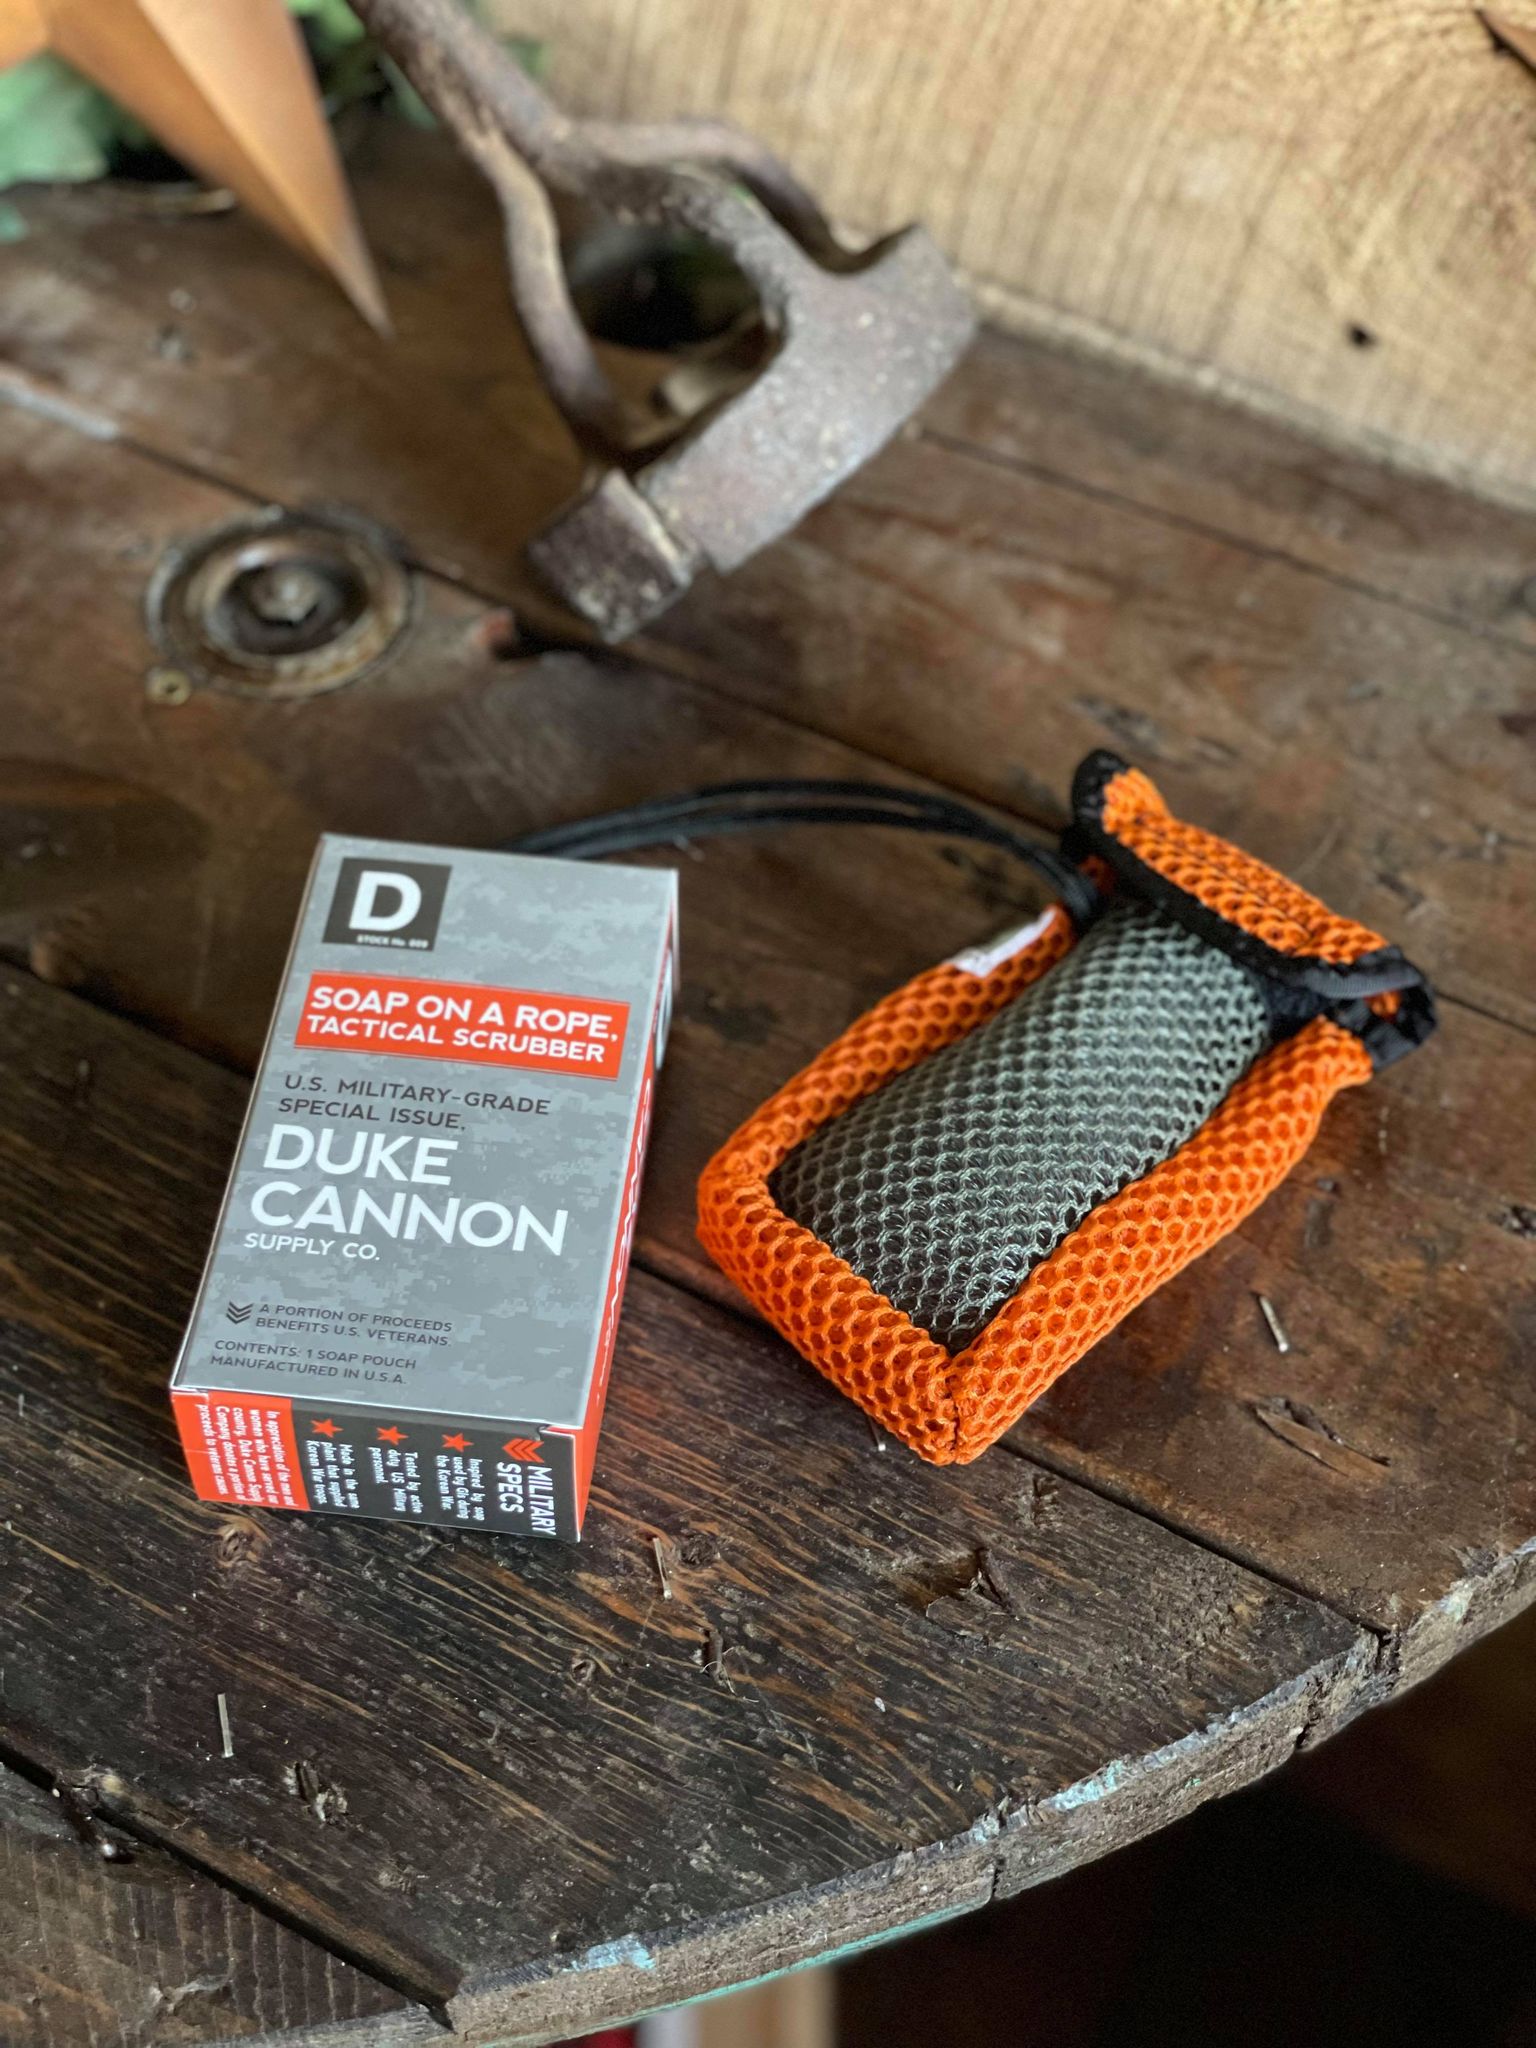 Tactical Scrubber-Duke Cannon-Men's Shaving & Grooming-Duke Cannon-Lucky J Boots & More, Women's, Men's, & Kids Western Store Located in Carthage, MO